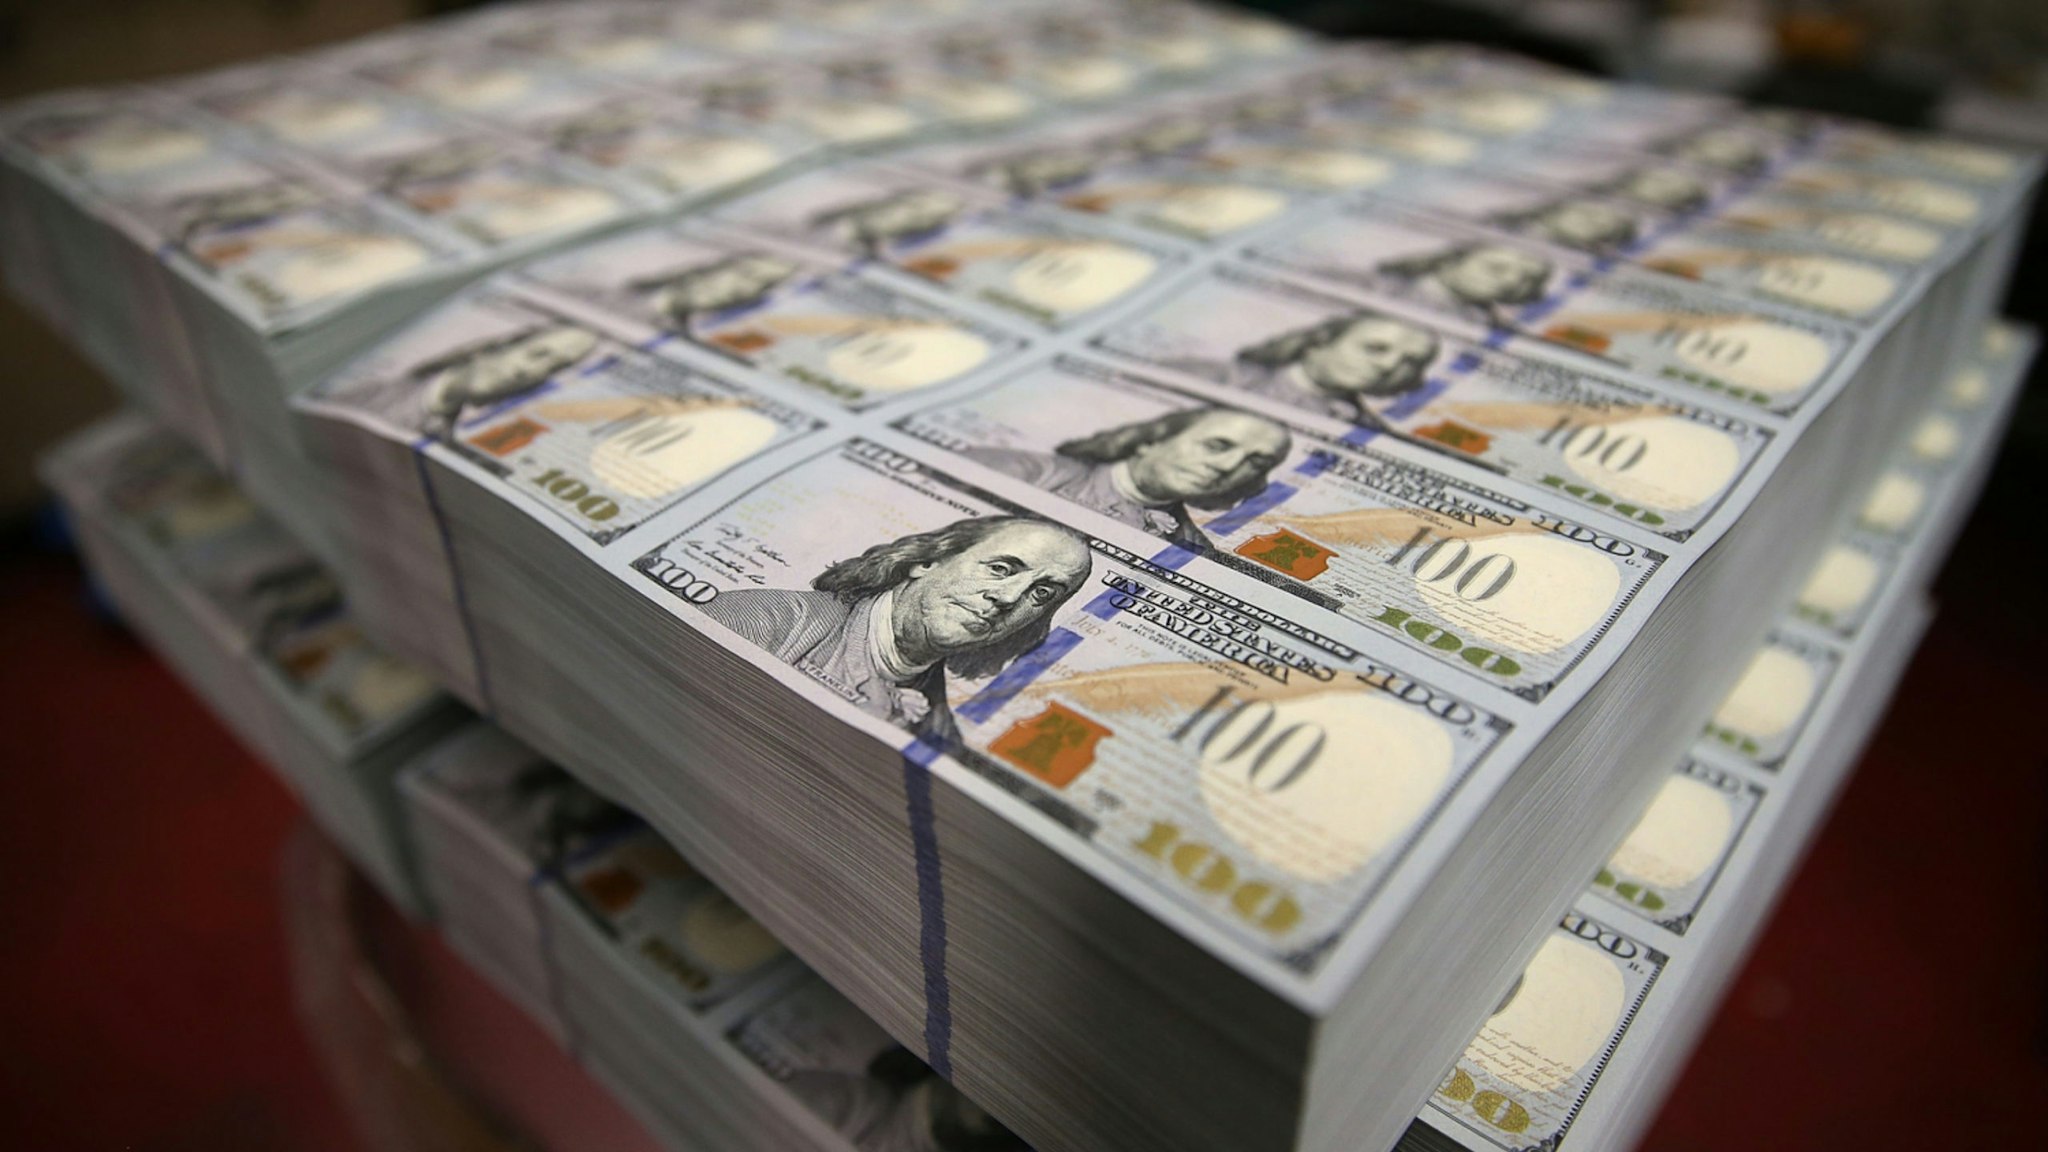 Newly redesigned $100 notes lay in stacks at the Bureau of Engraving and Printing on May 20, 2013 in Washington, DC.